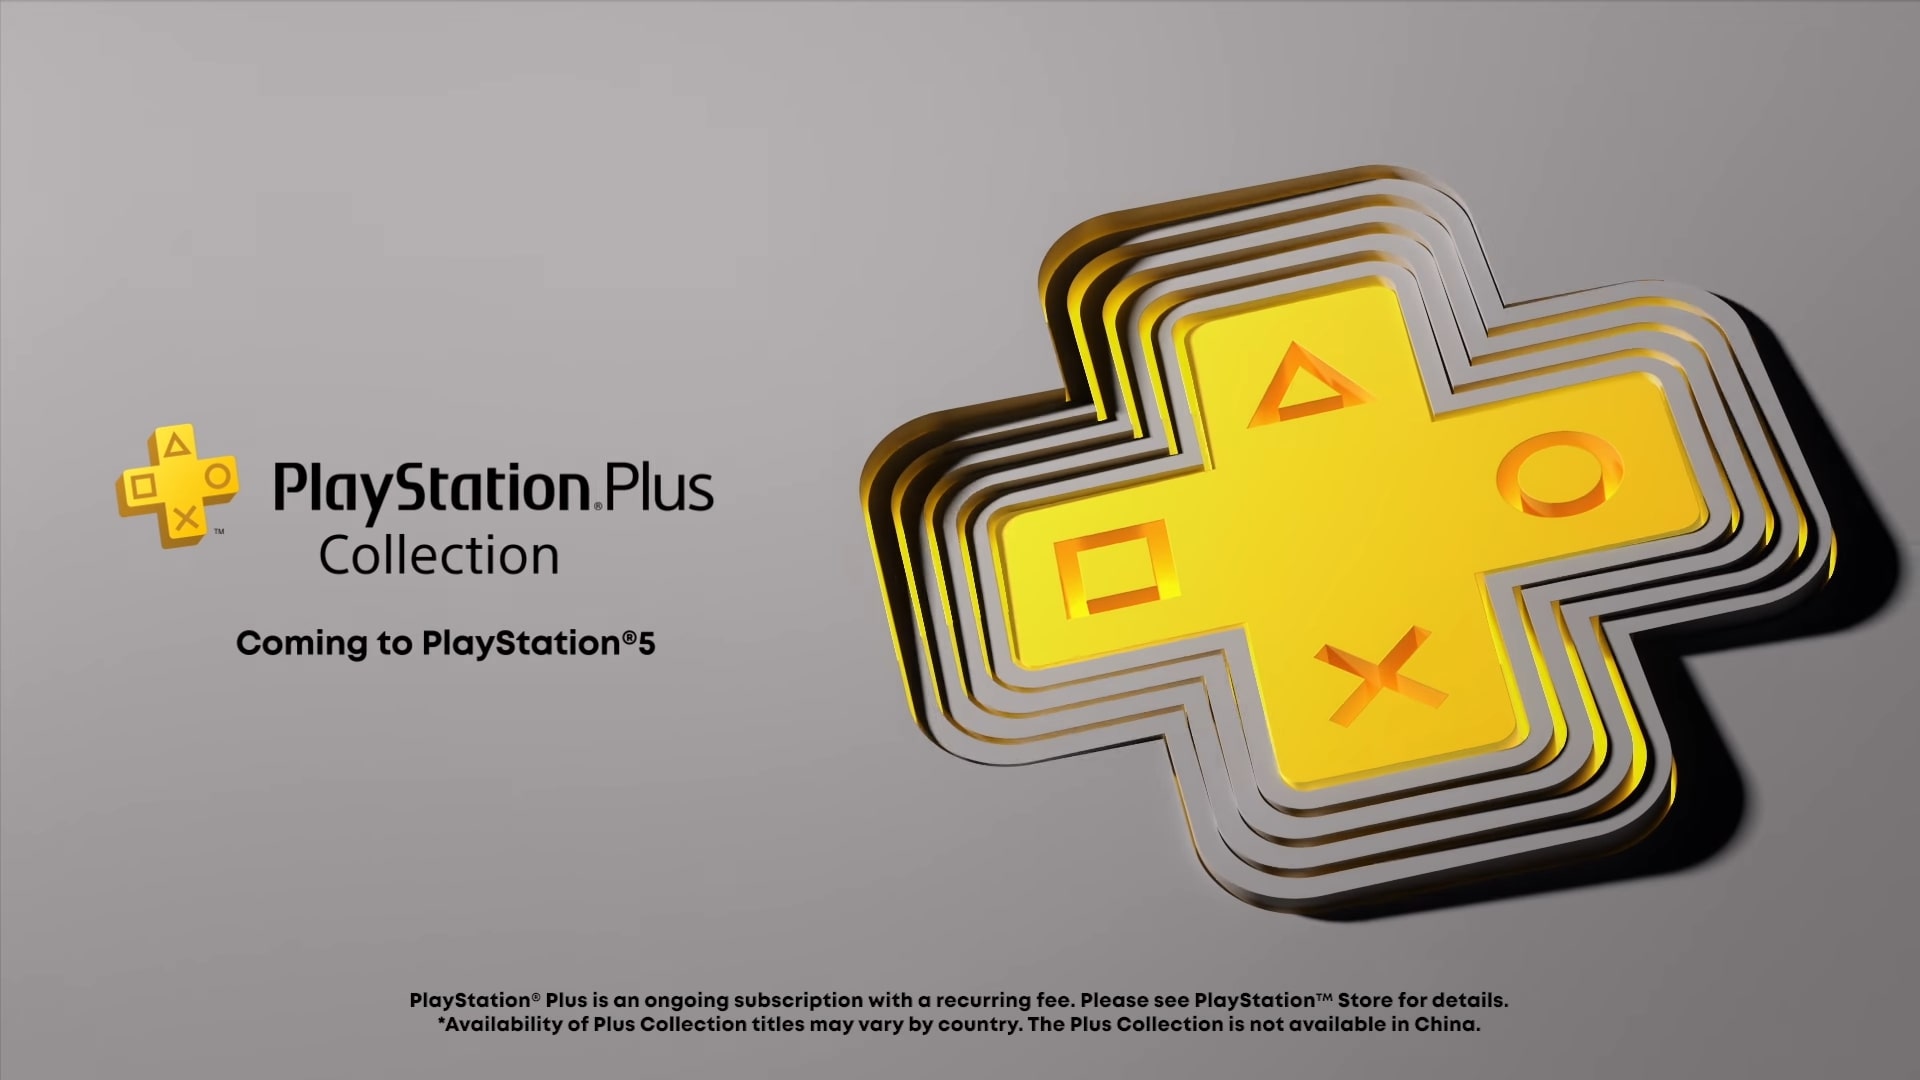 IGN - Sony announced its new PlayStation Plus subscription tiers